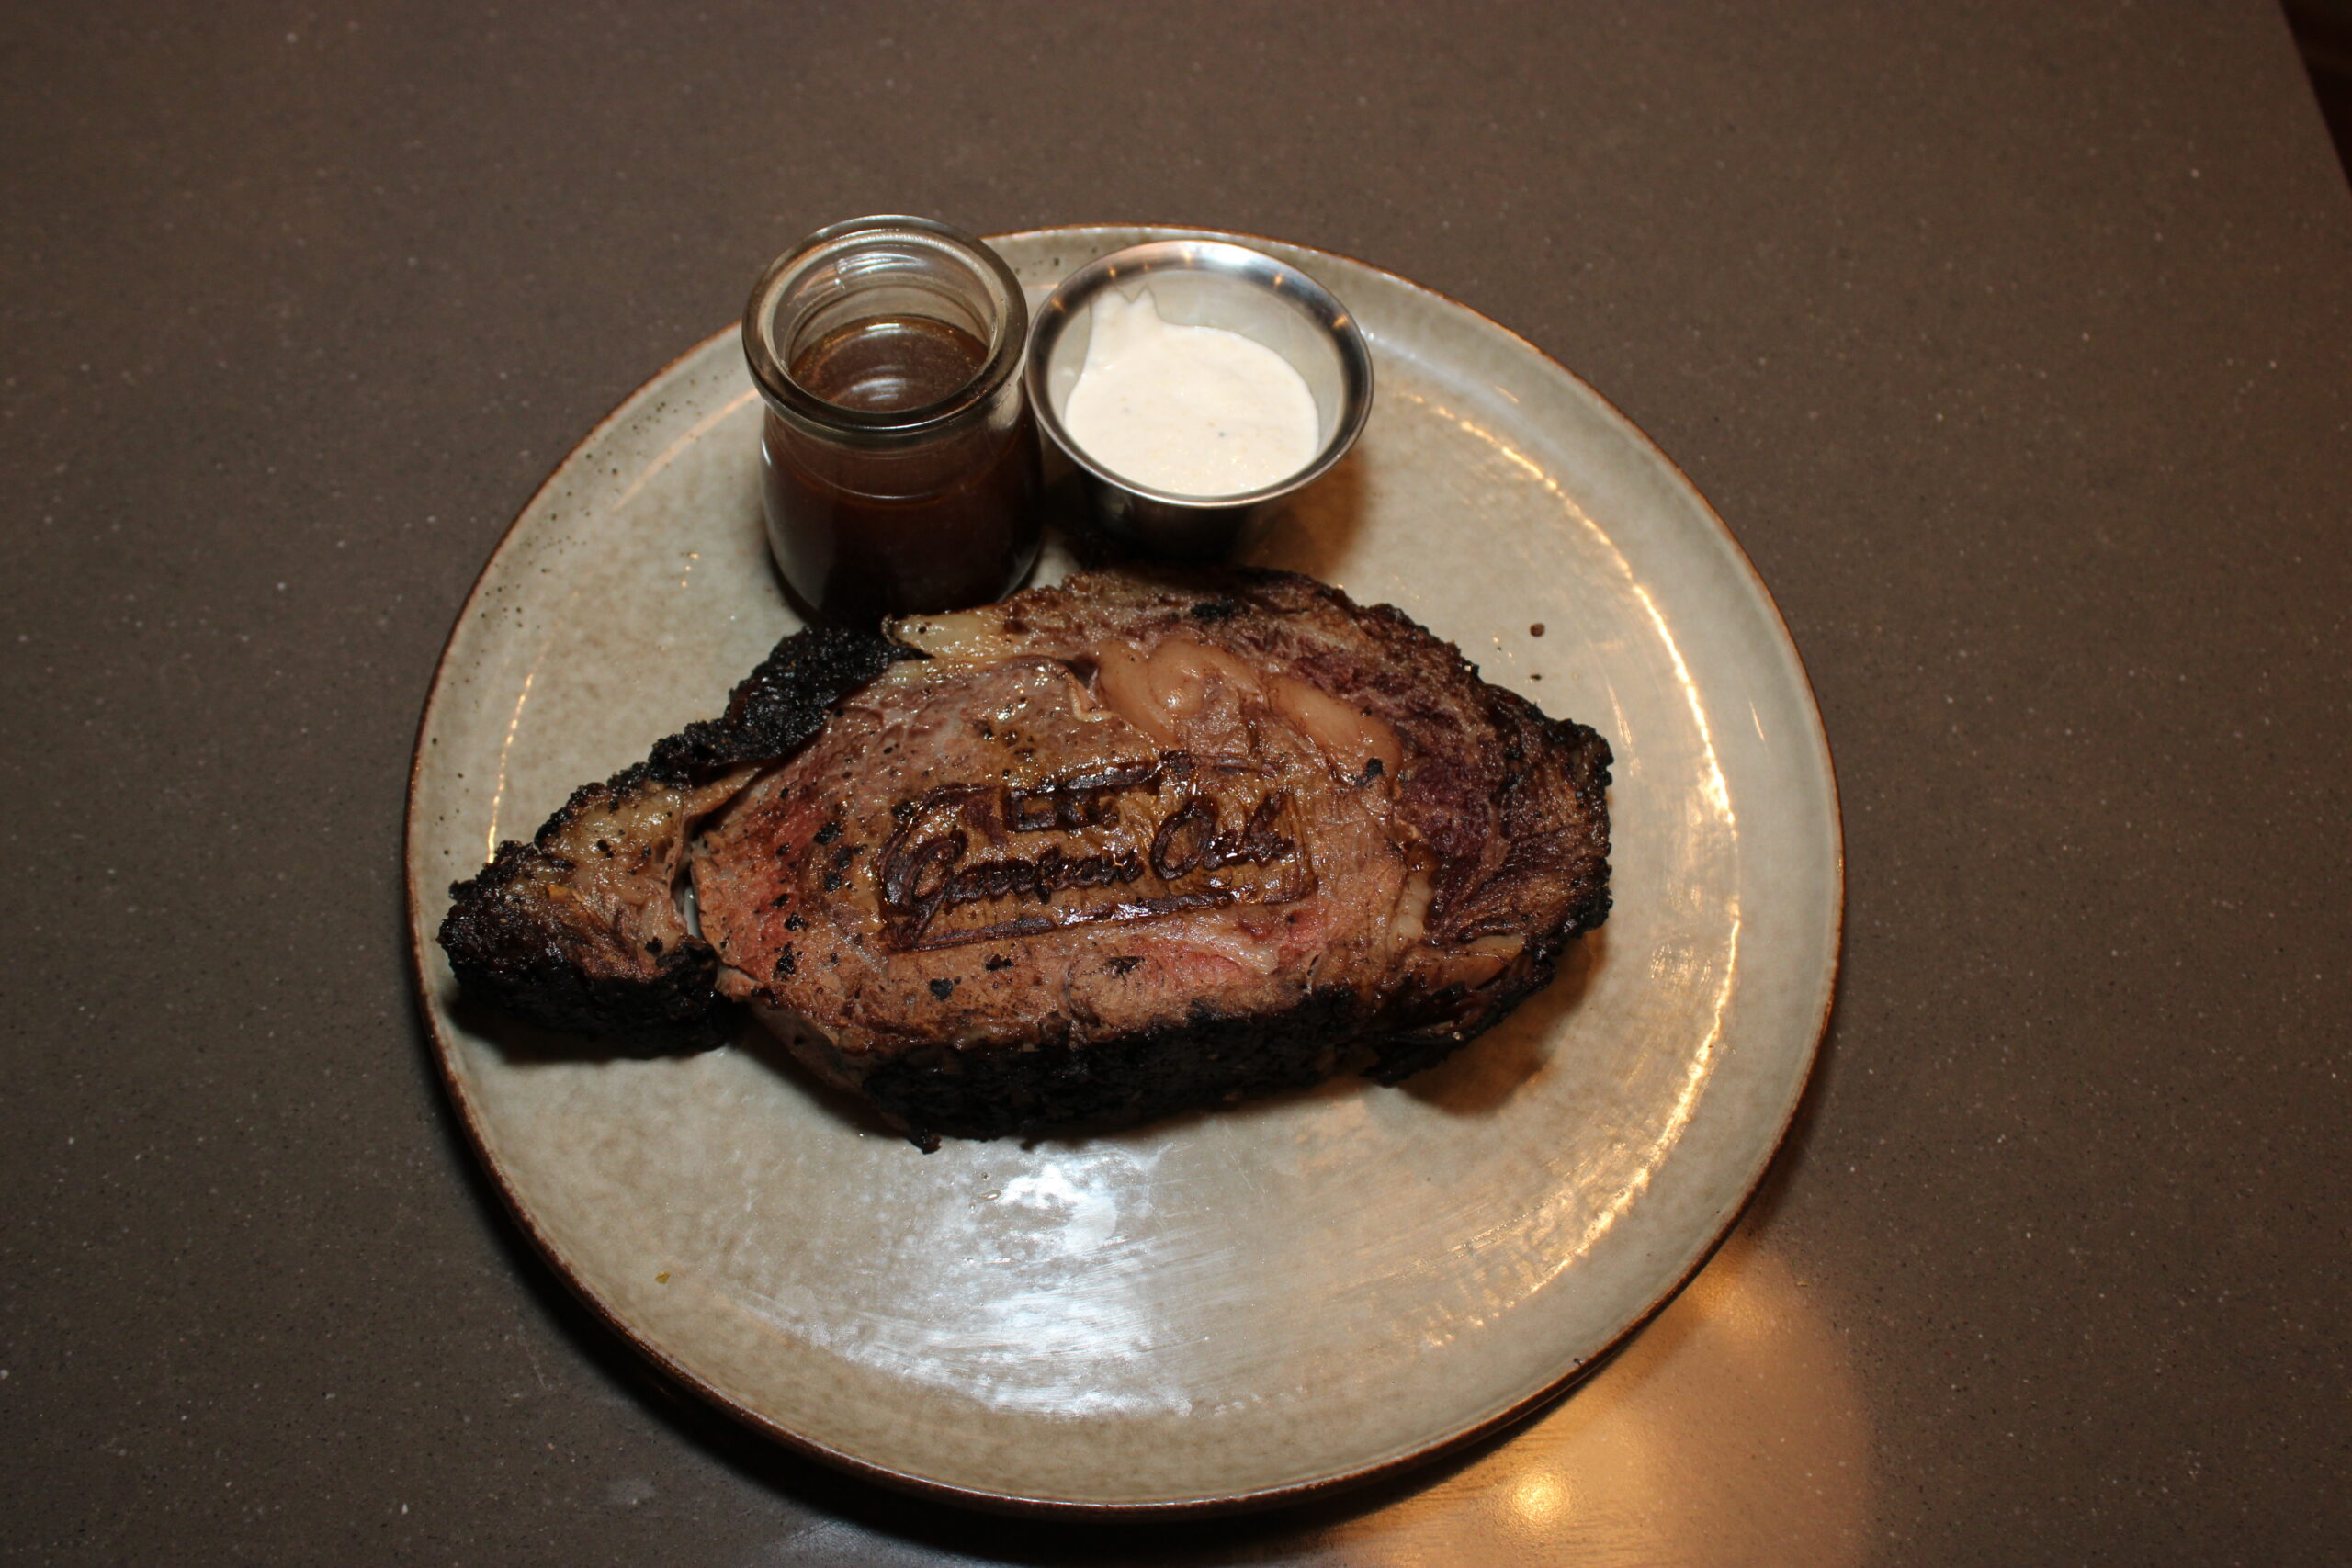 Image of Queen Cut Prime Rib with Au Jus and Horseradish Cream. The Prime Rib is branded with "Garrison Oak" wordmark